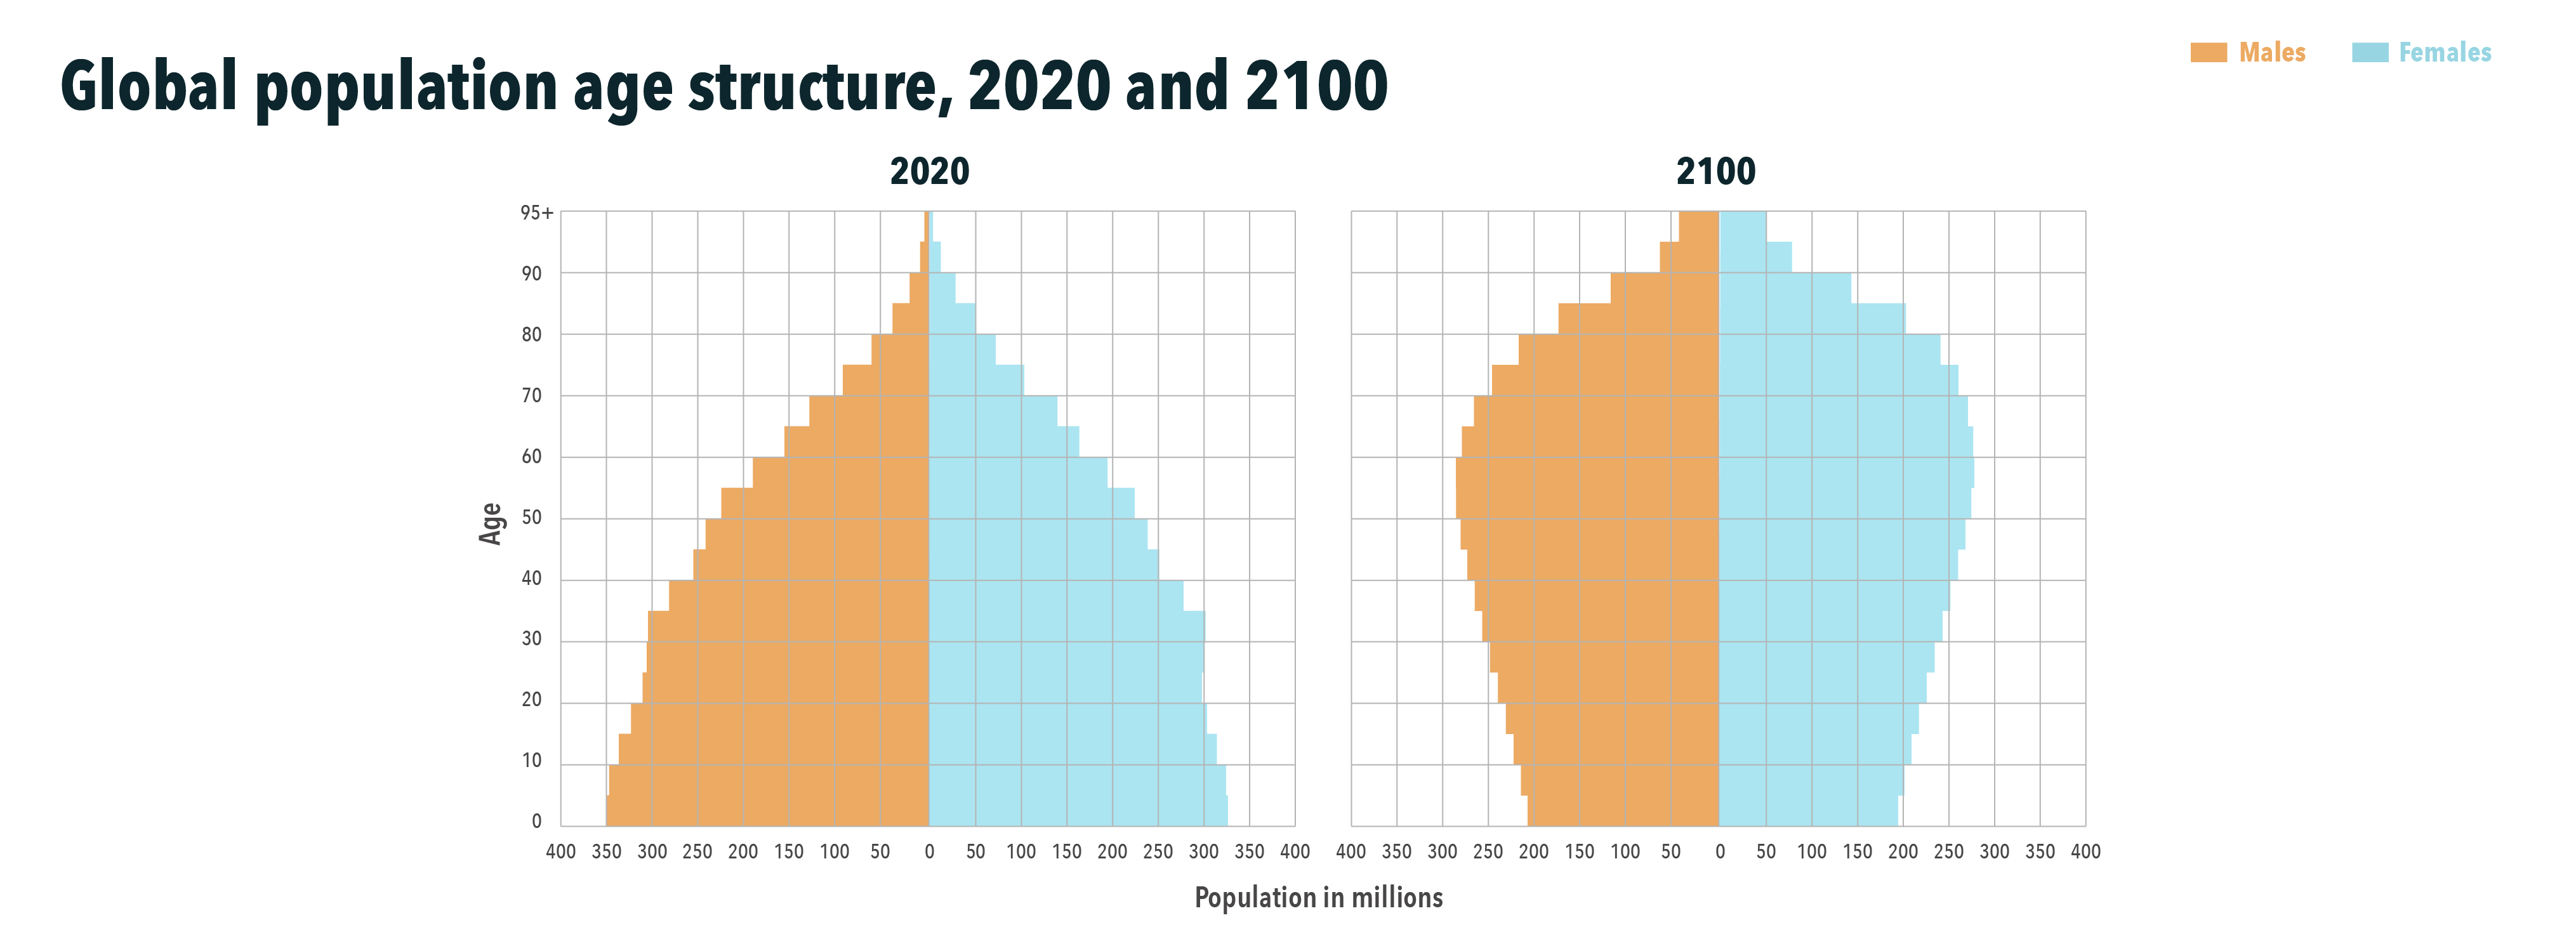 Visualization of global population age structure showing older-skewed population predicted in the year 2100